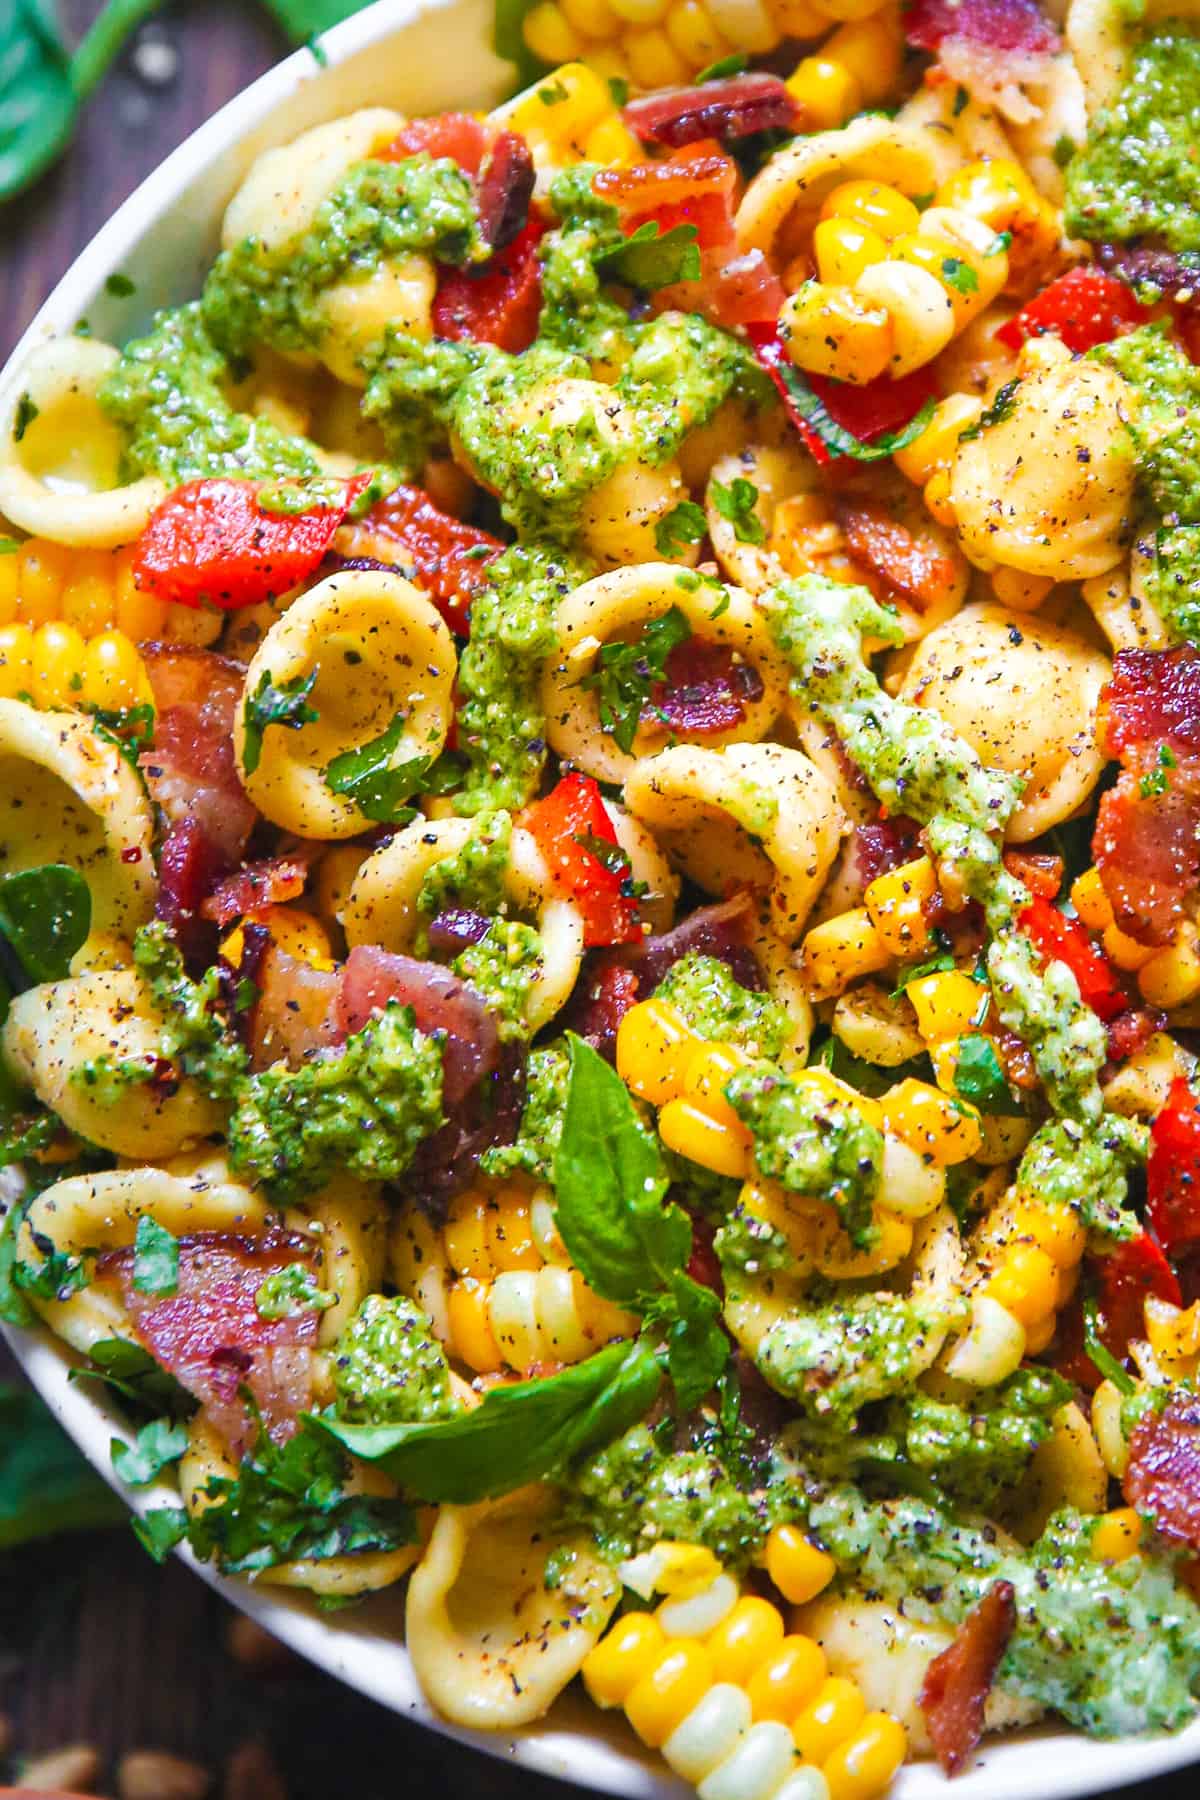 Corn Pasta Salad with Bacon and Creamy Pesto Dressing in a bowl